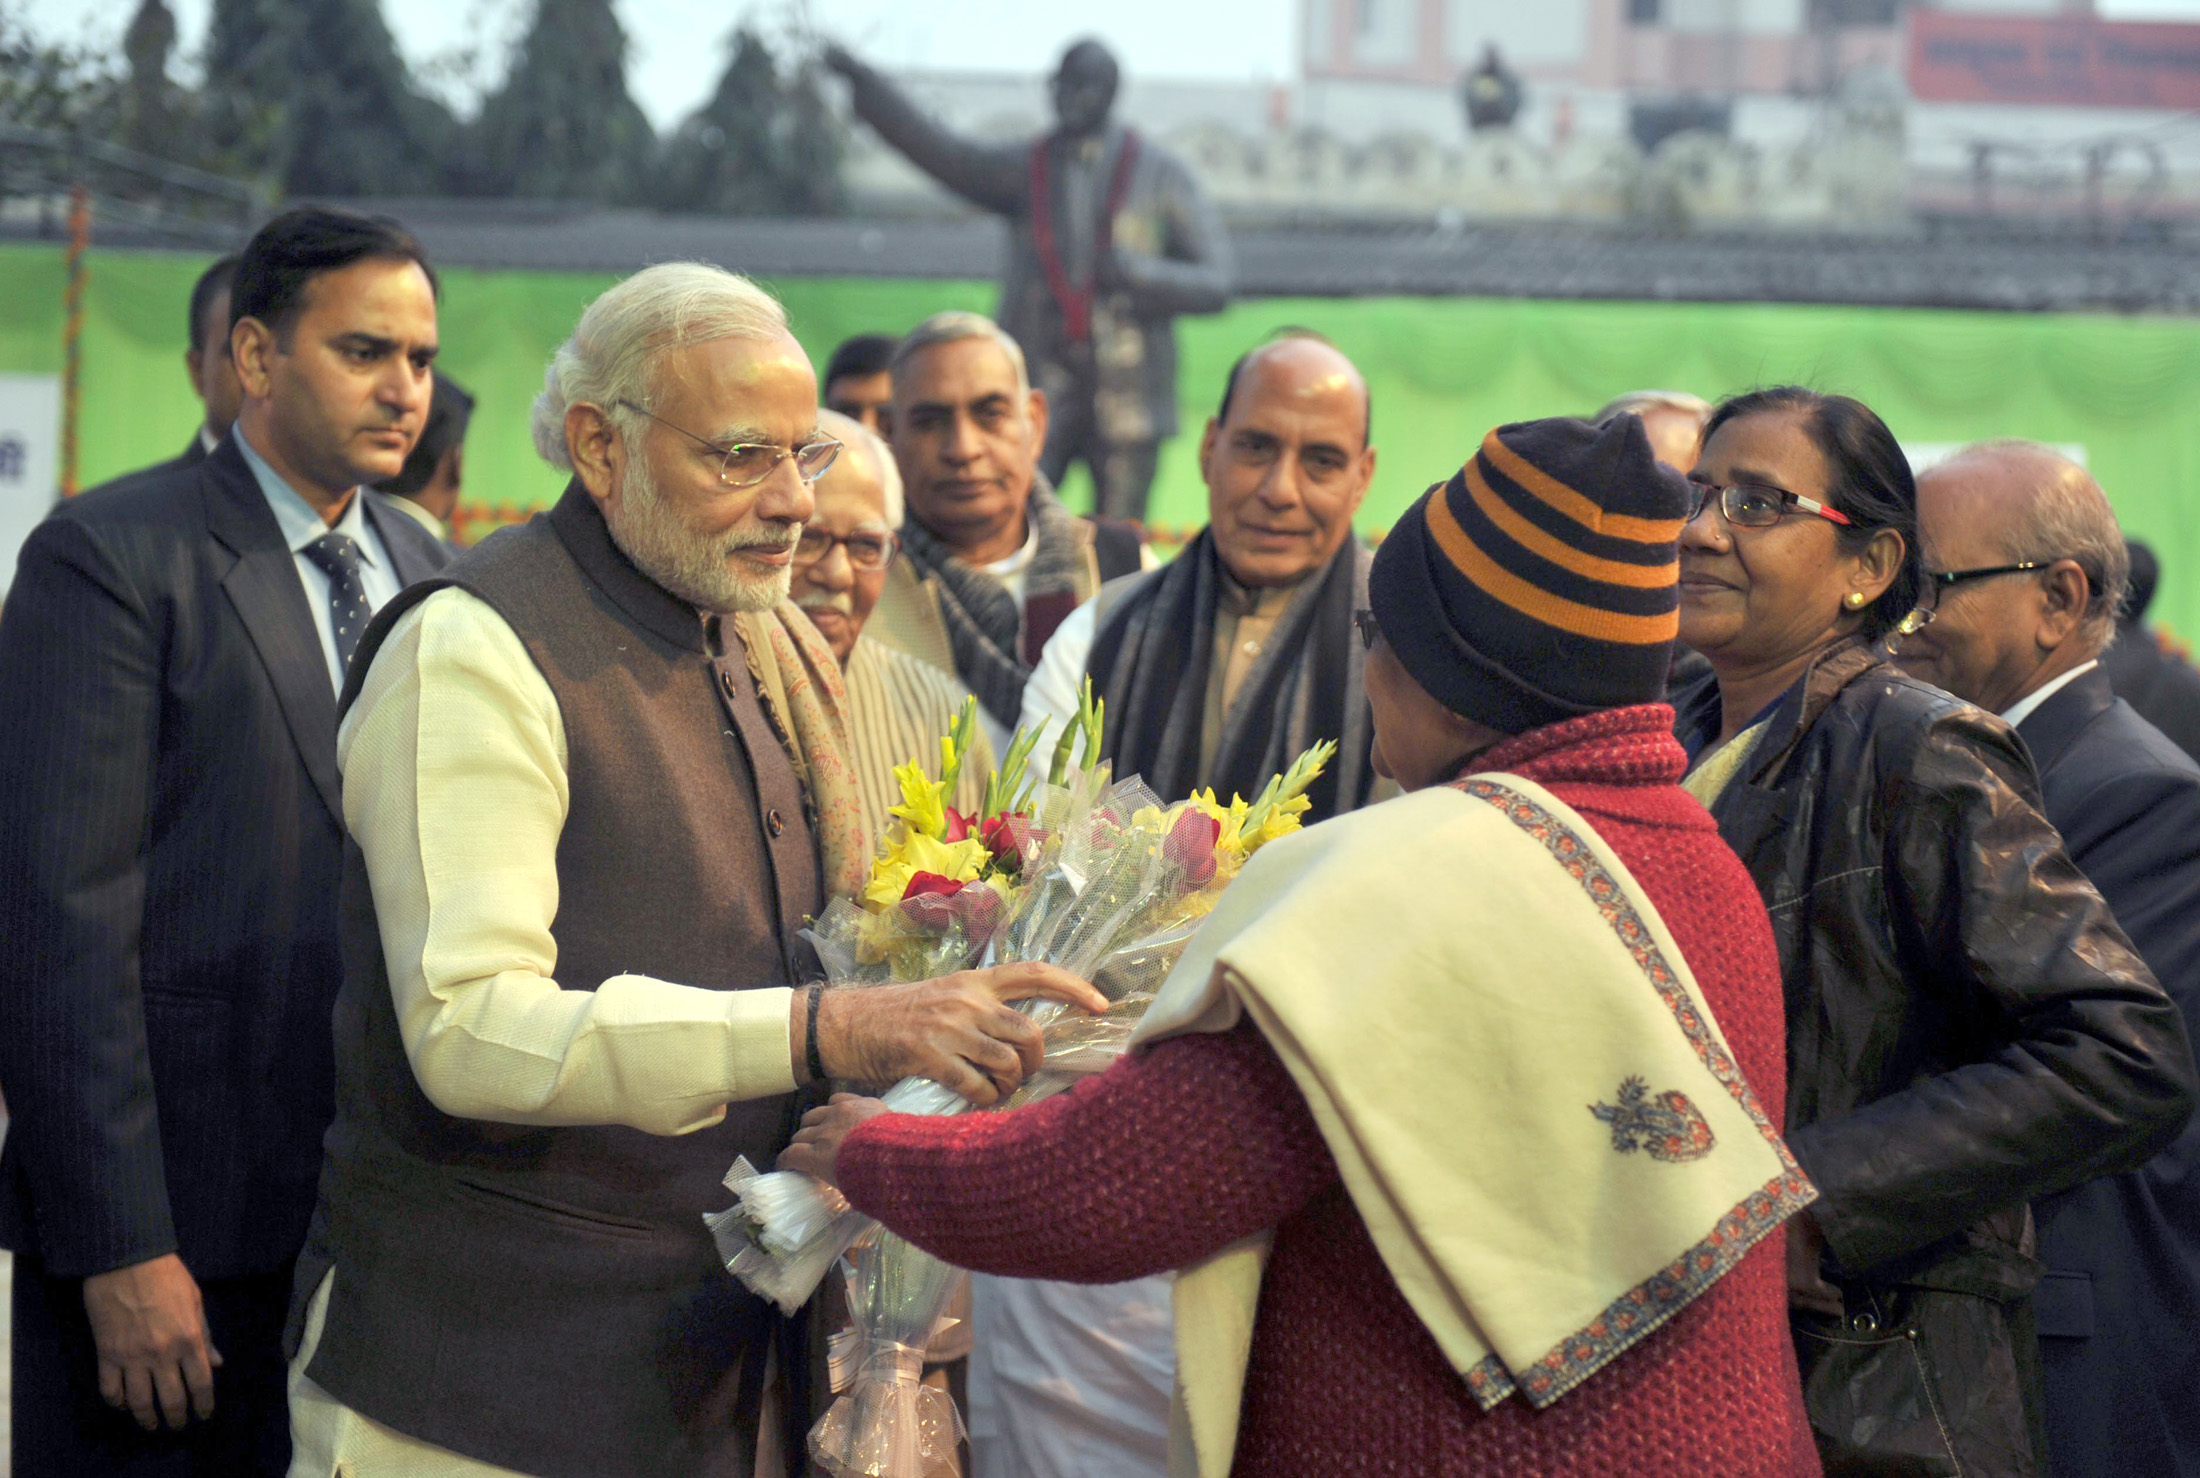 The Prime Minister, Shri Narendra Modi being welcomed on his arrival, at Ambedkar Mahashaba campus, in Lucknow, Uttar Pradesh on January 22, 2016. 		The Governor of Uttar Pradesh, Shri Ram Naik and the Union Home Minister, Shri Rajnath Singh are also seen.